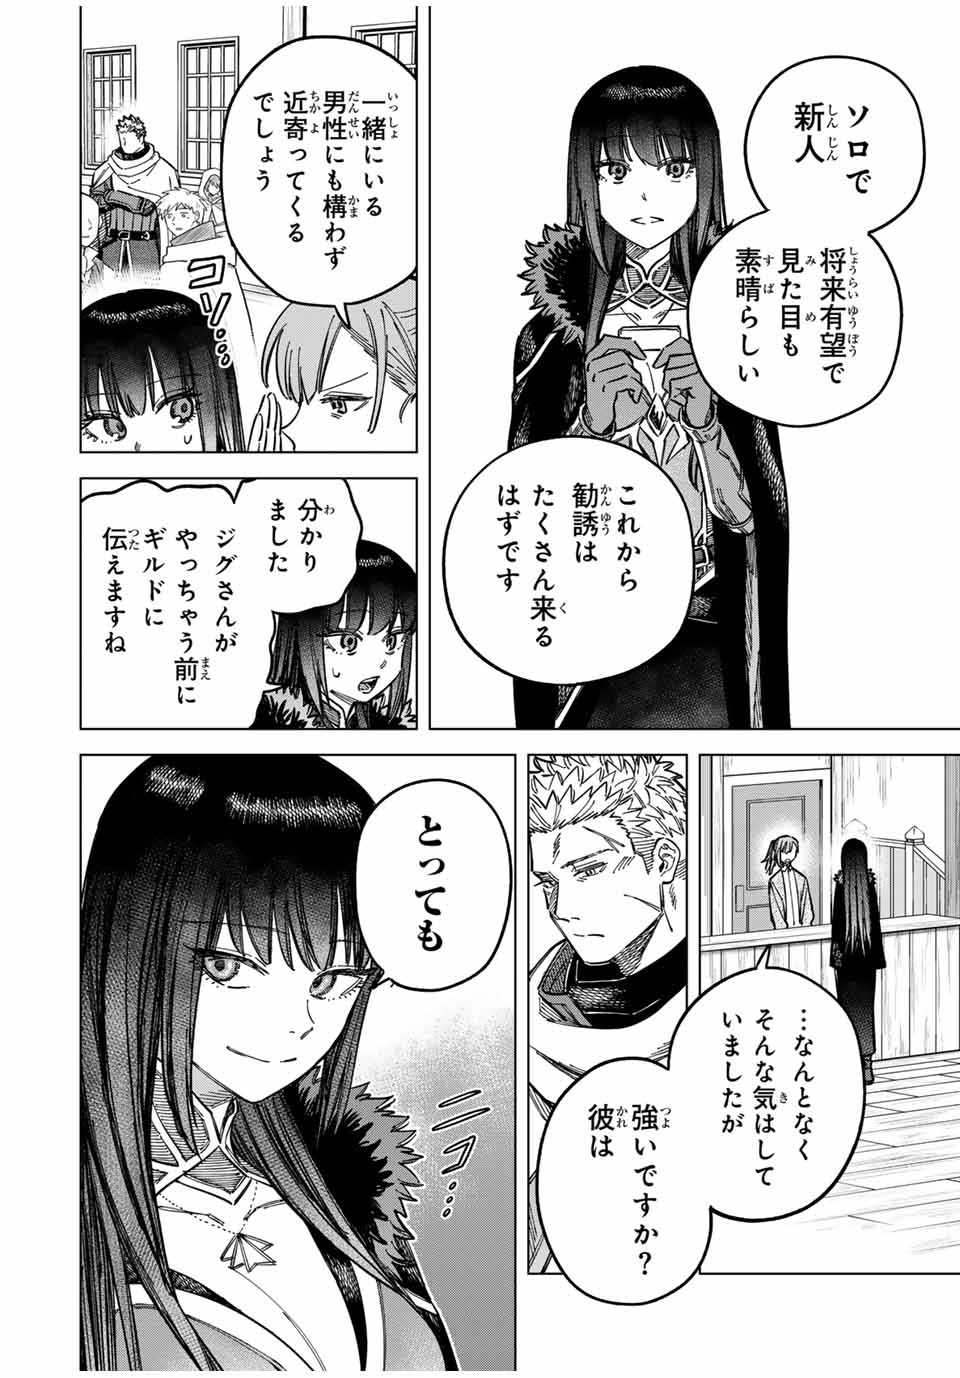 Witch and Mercenary 魔女と傭兵 第8話 - Page 2